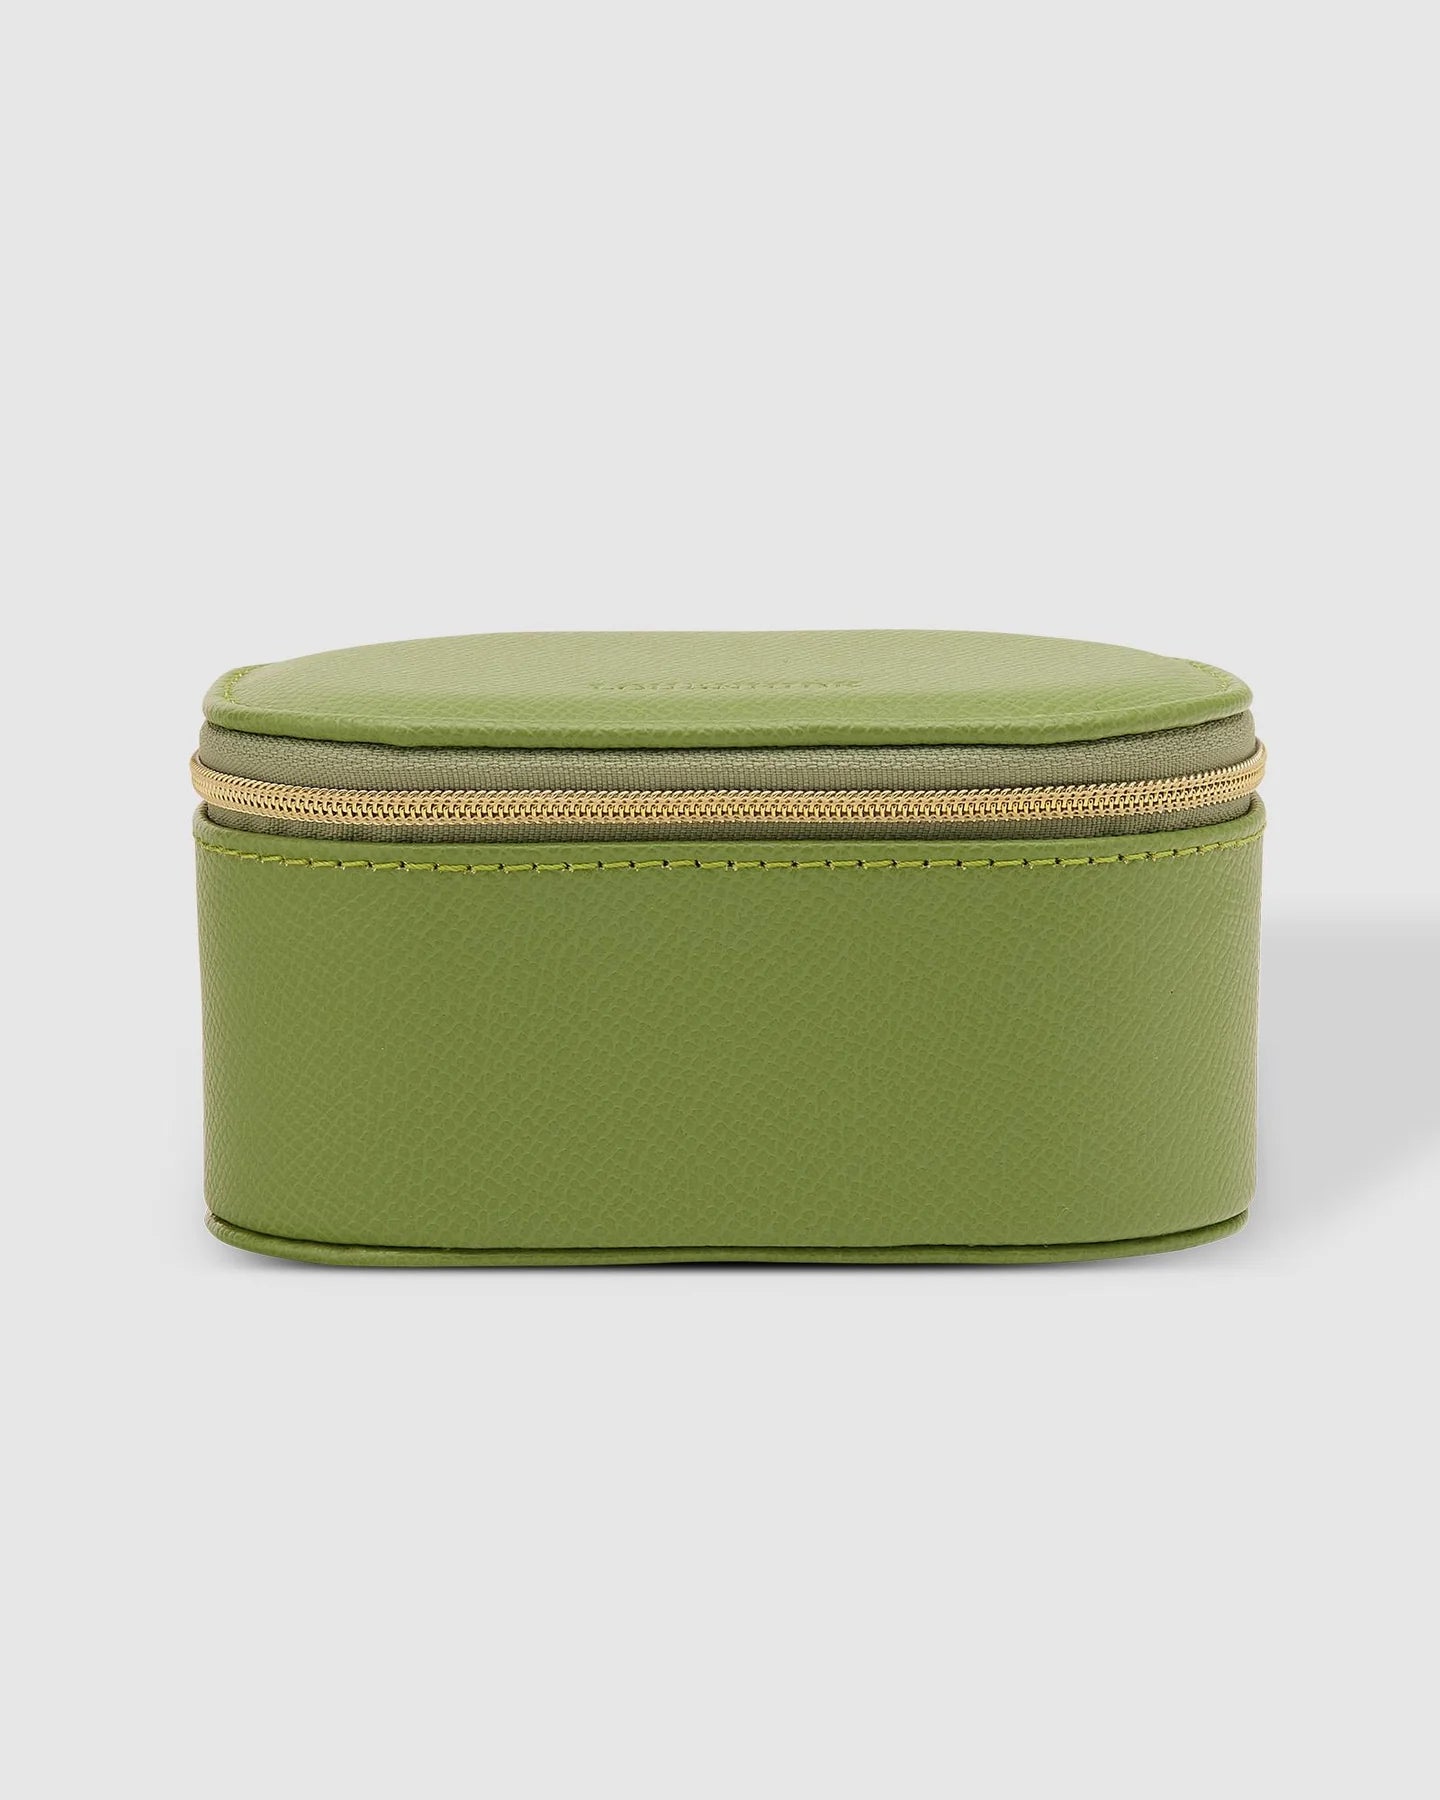 Olive Jewellery Box (Avocado) - Something For Me​​